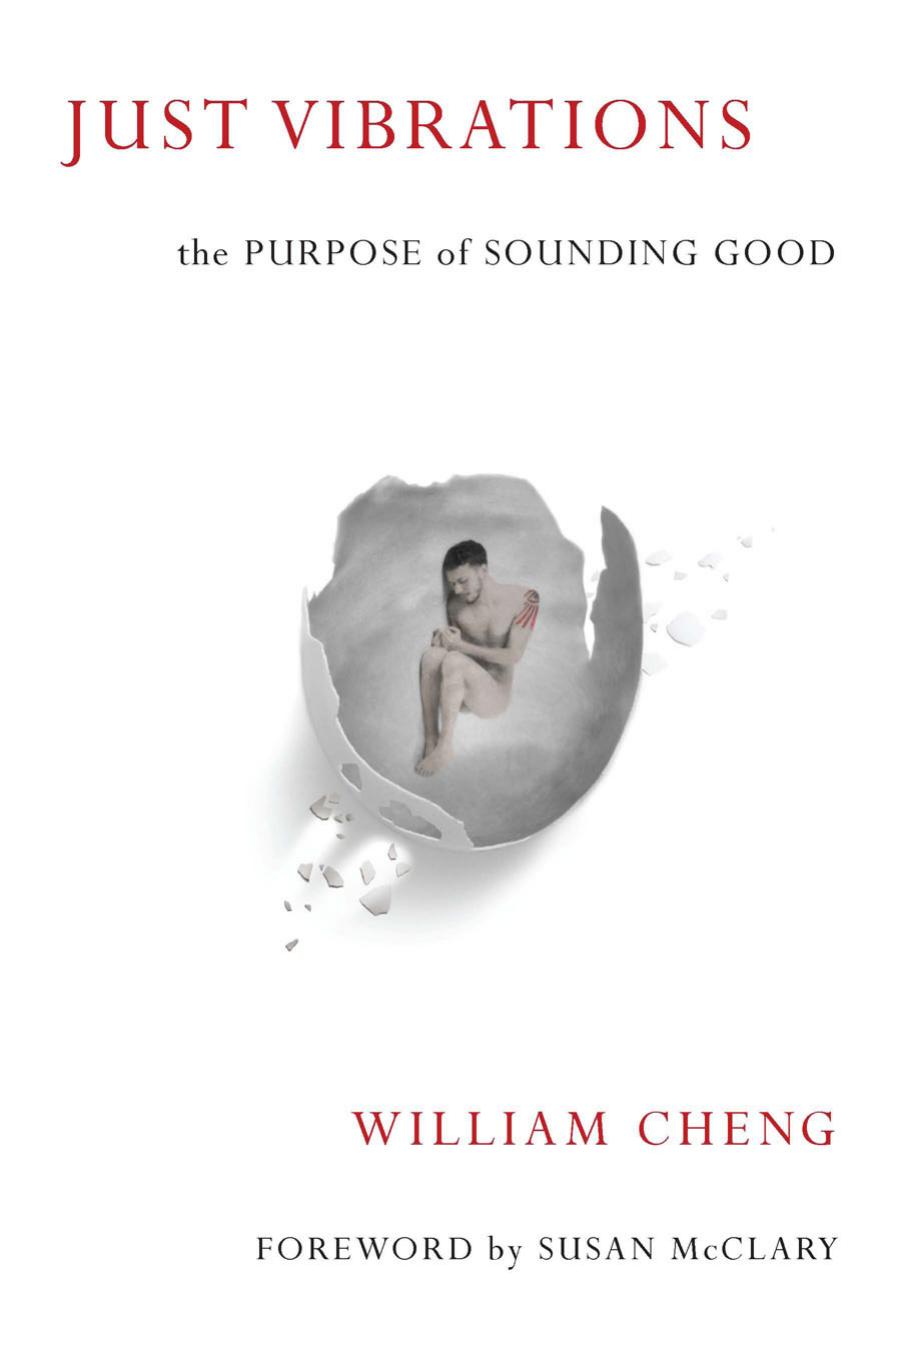 Just Vibrations: The Purpose of Sounding Good by William Cheng